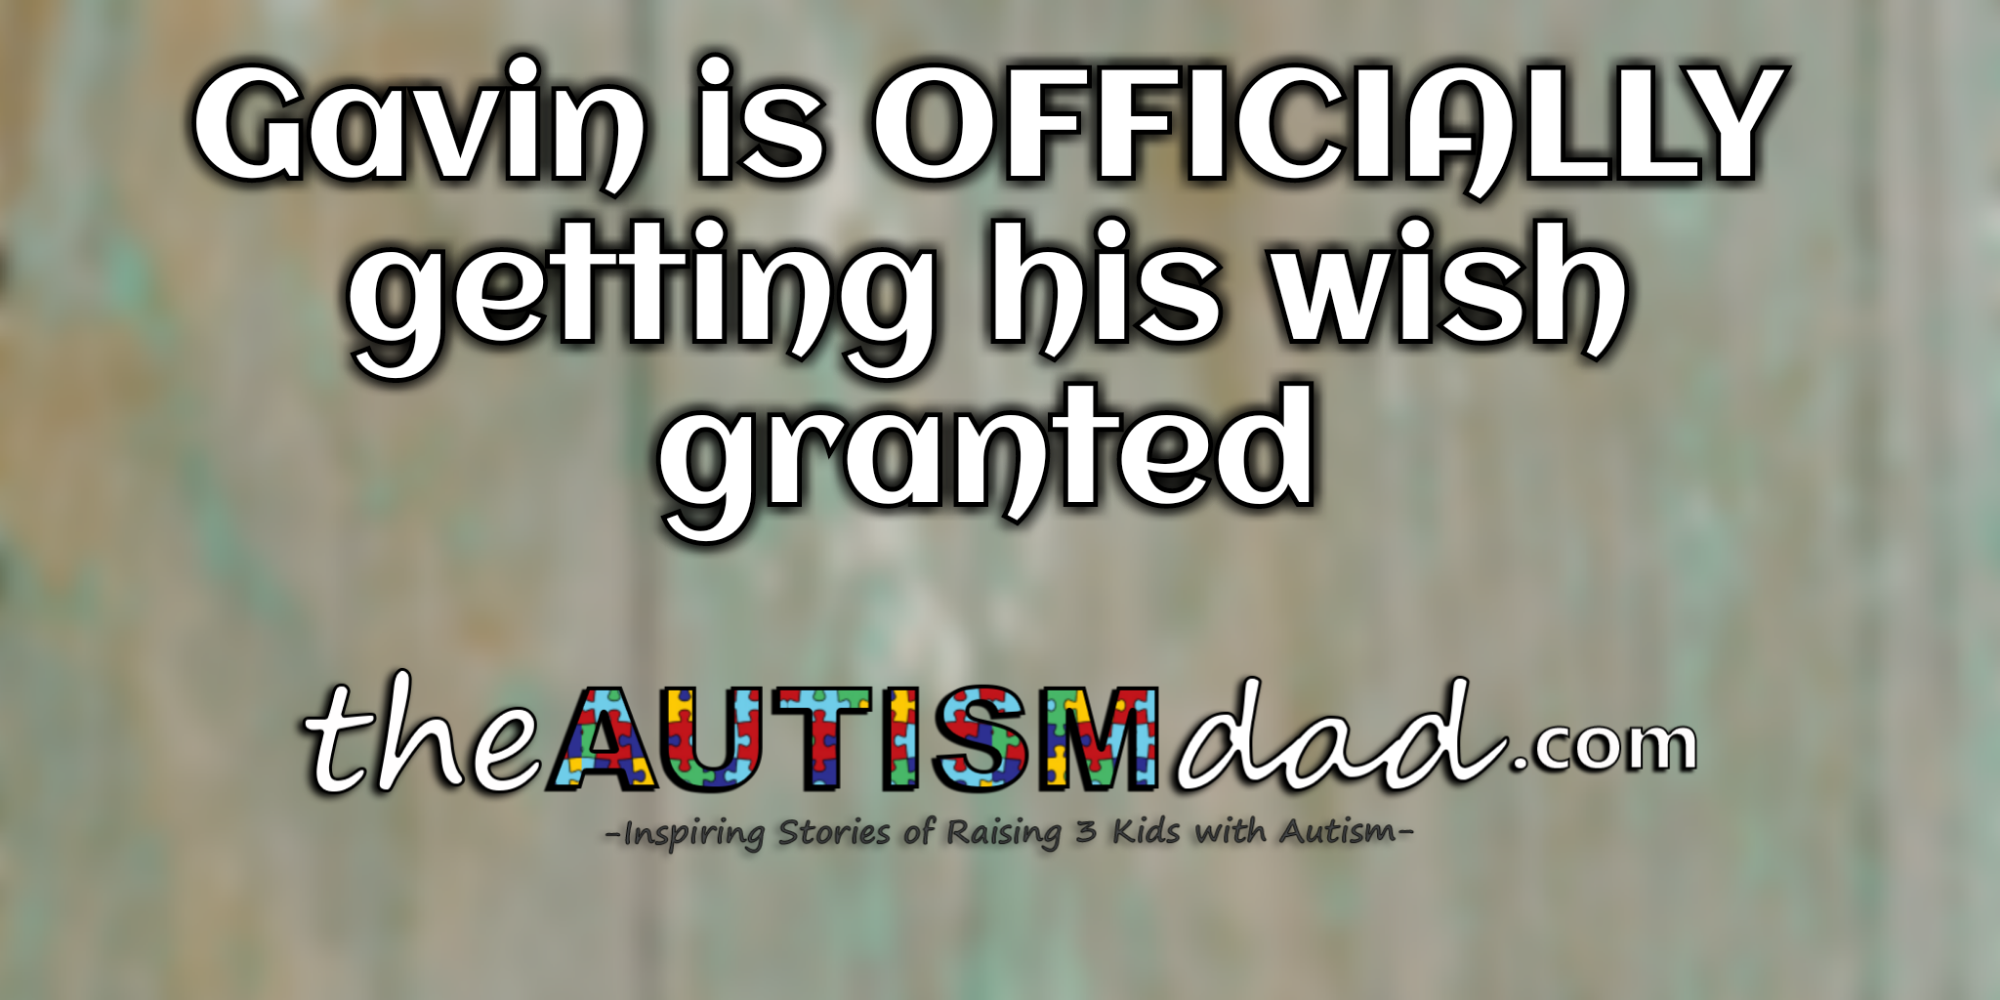 Read more about the article Gavin is OFFICIALLY getting his wish granted